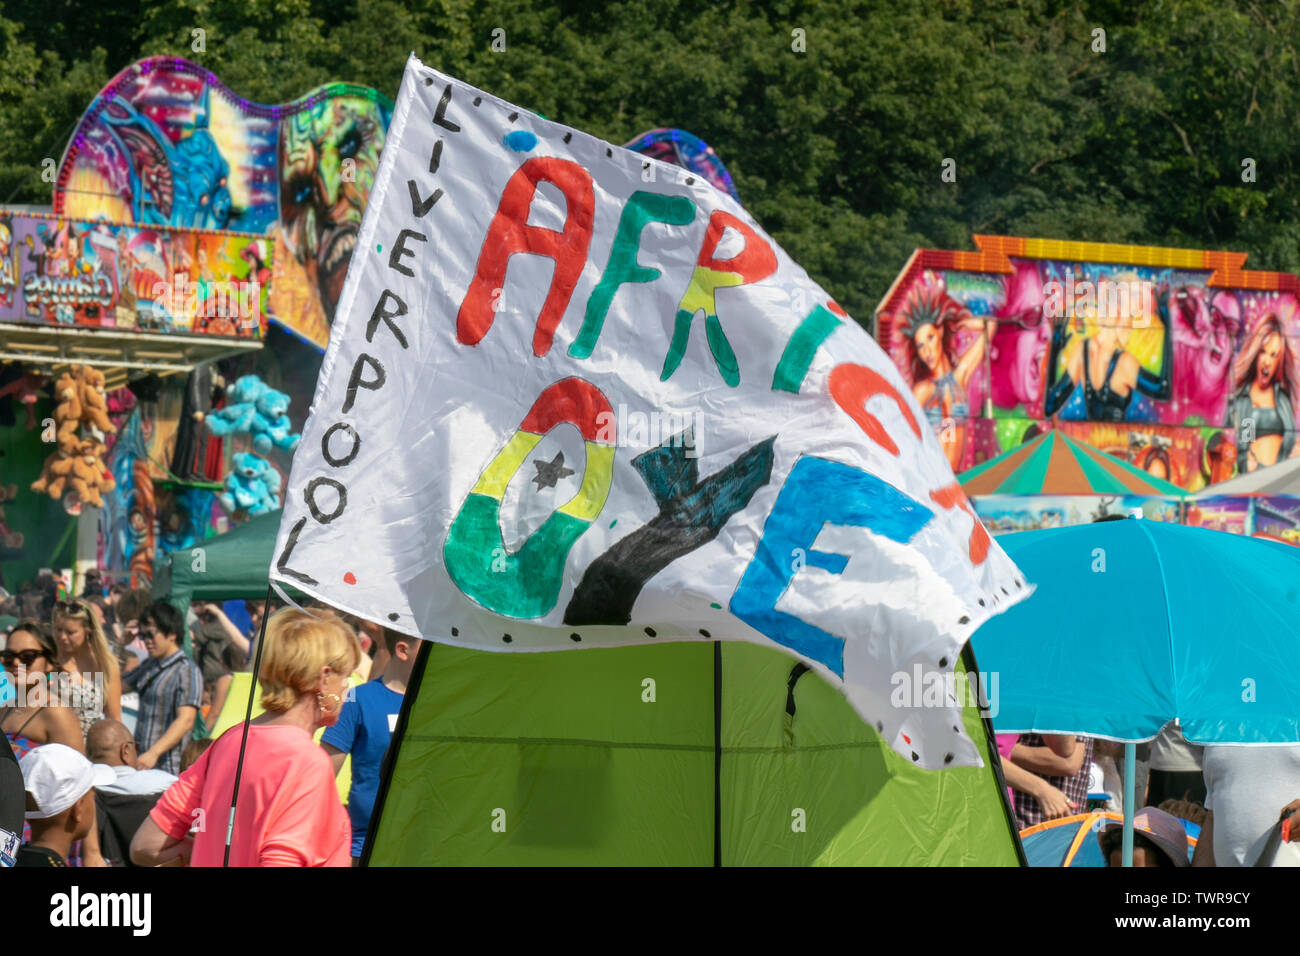 Africa Oye Music Festival banner.  Music lovers, vendors, attend the fantastic Africa Oyé music Festival in Liverpool’s Sefton Park. The UK’s largest free celebration of African music and culture, goods, traders & merchandise brings out the crowds to enjoy the entertainment as festival-goers bask in the sun. Credit: MWI/Alamy Live News Stock Photo